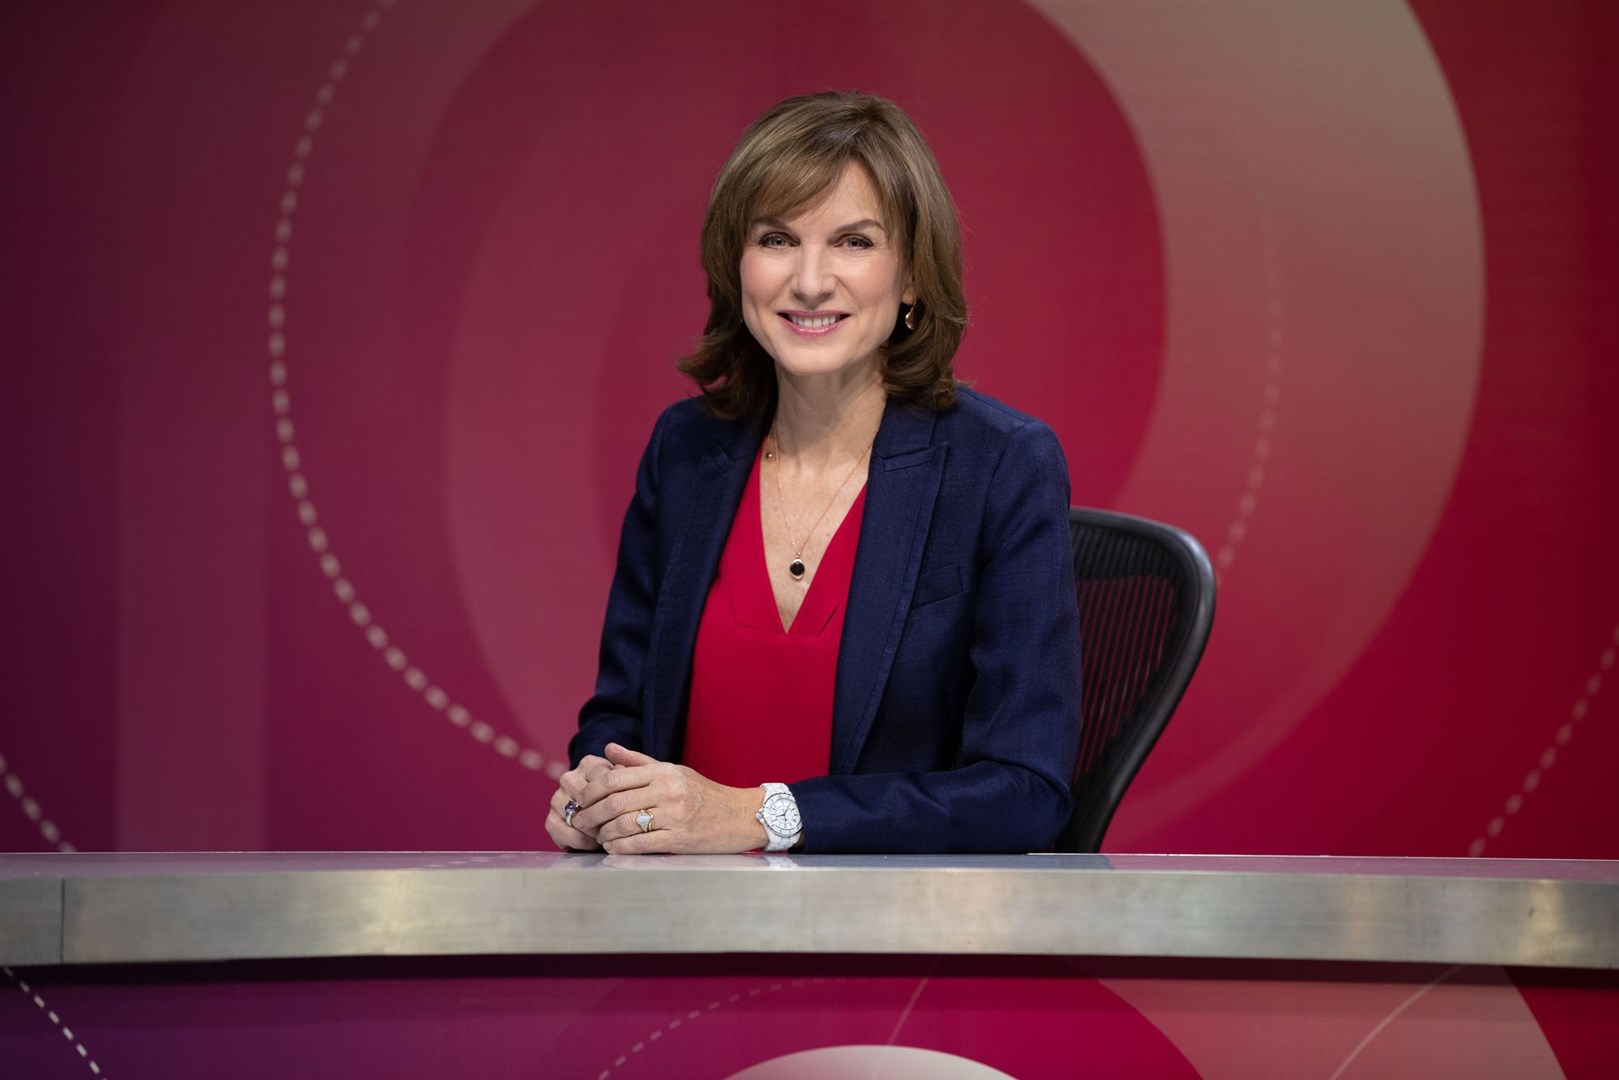 Question Time hosted by Fiona Bruce comes from the north-east.